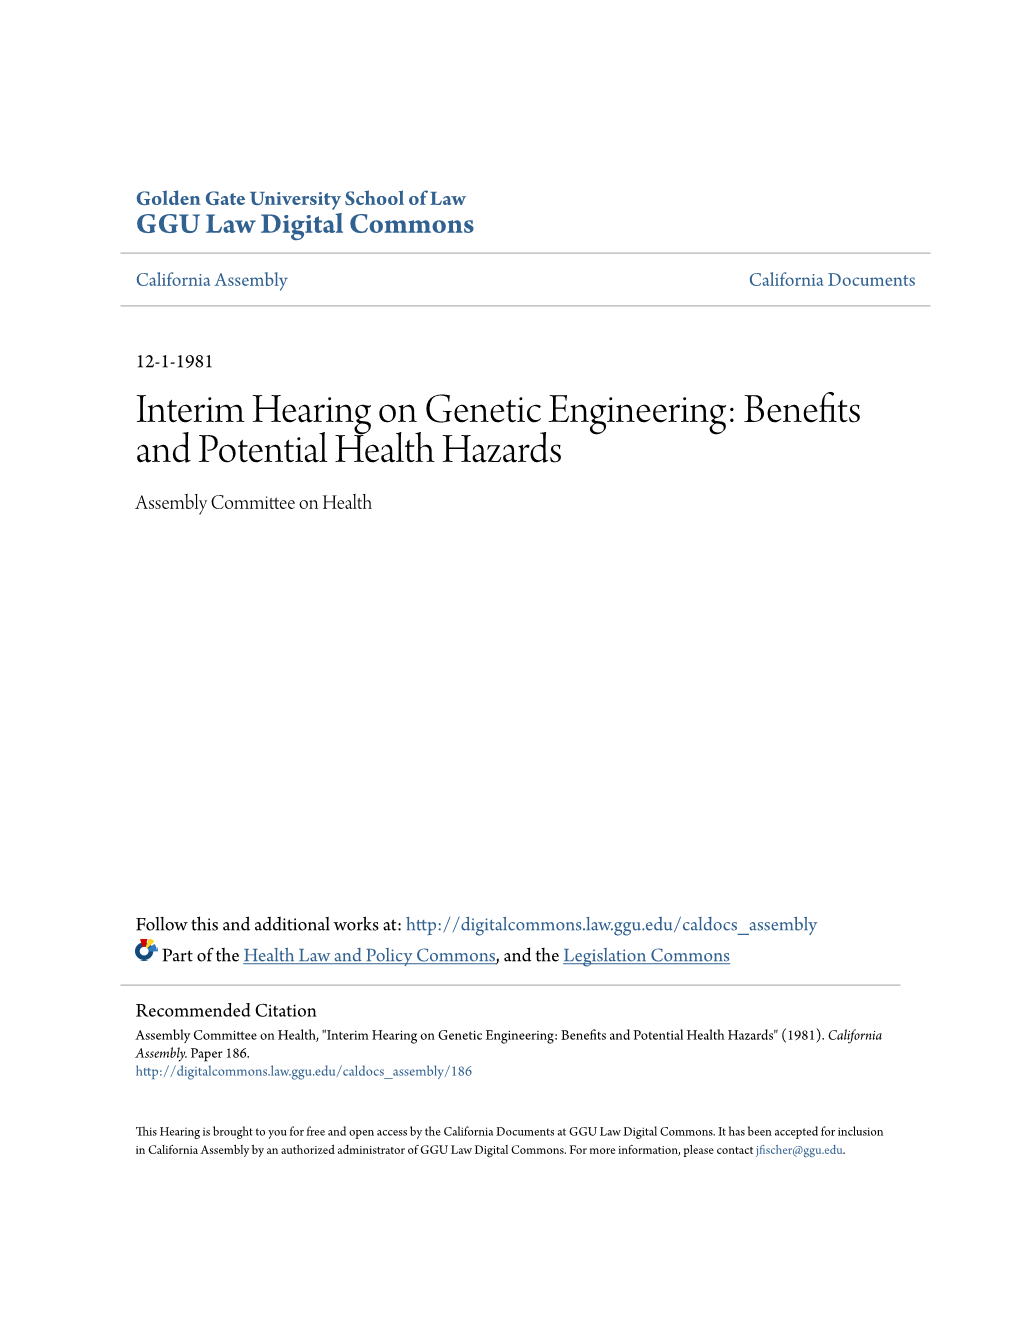 Genetic Engineering: Benefits and Potential Health Hazards Assembly Committee on Health